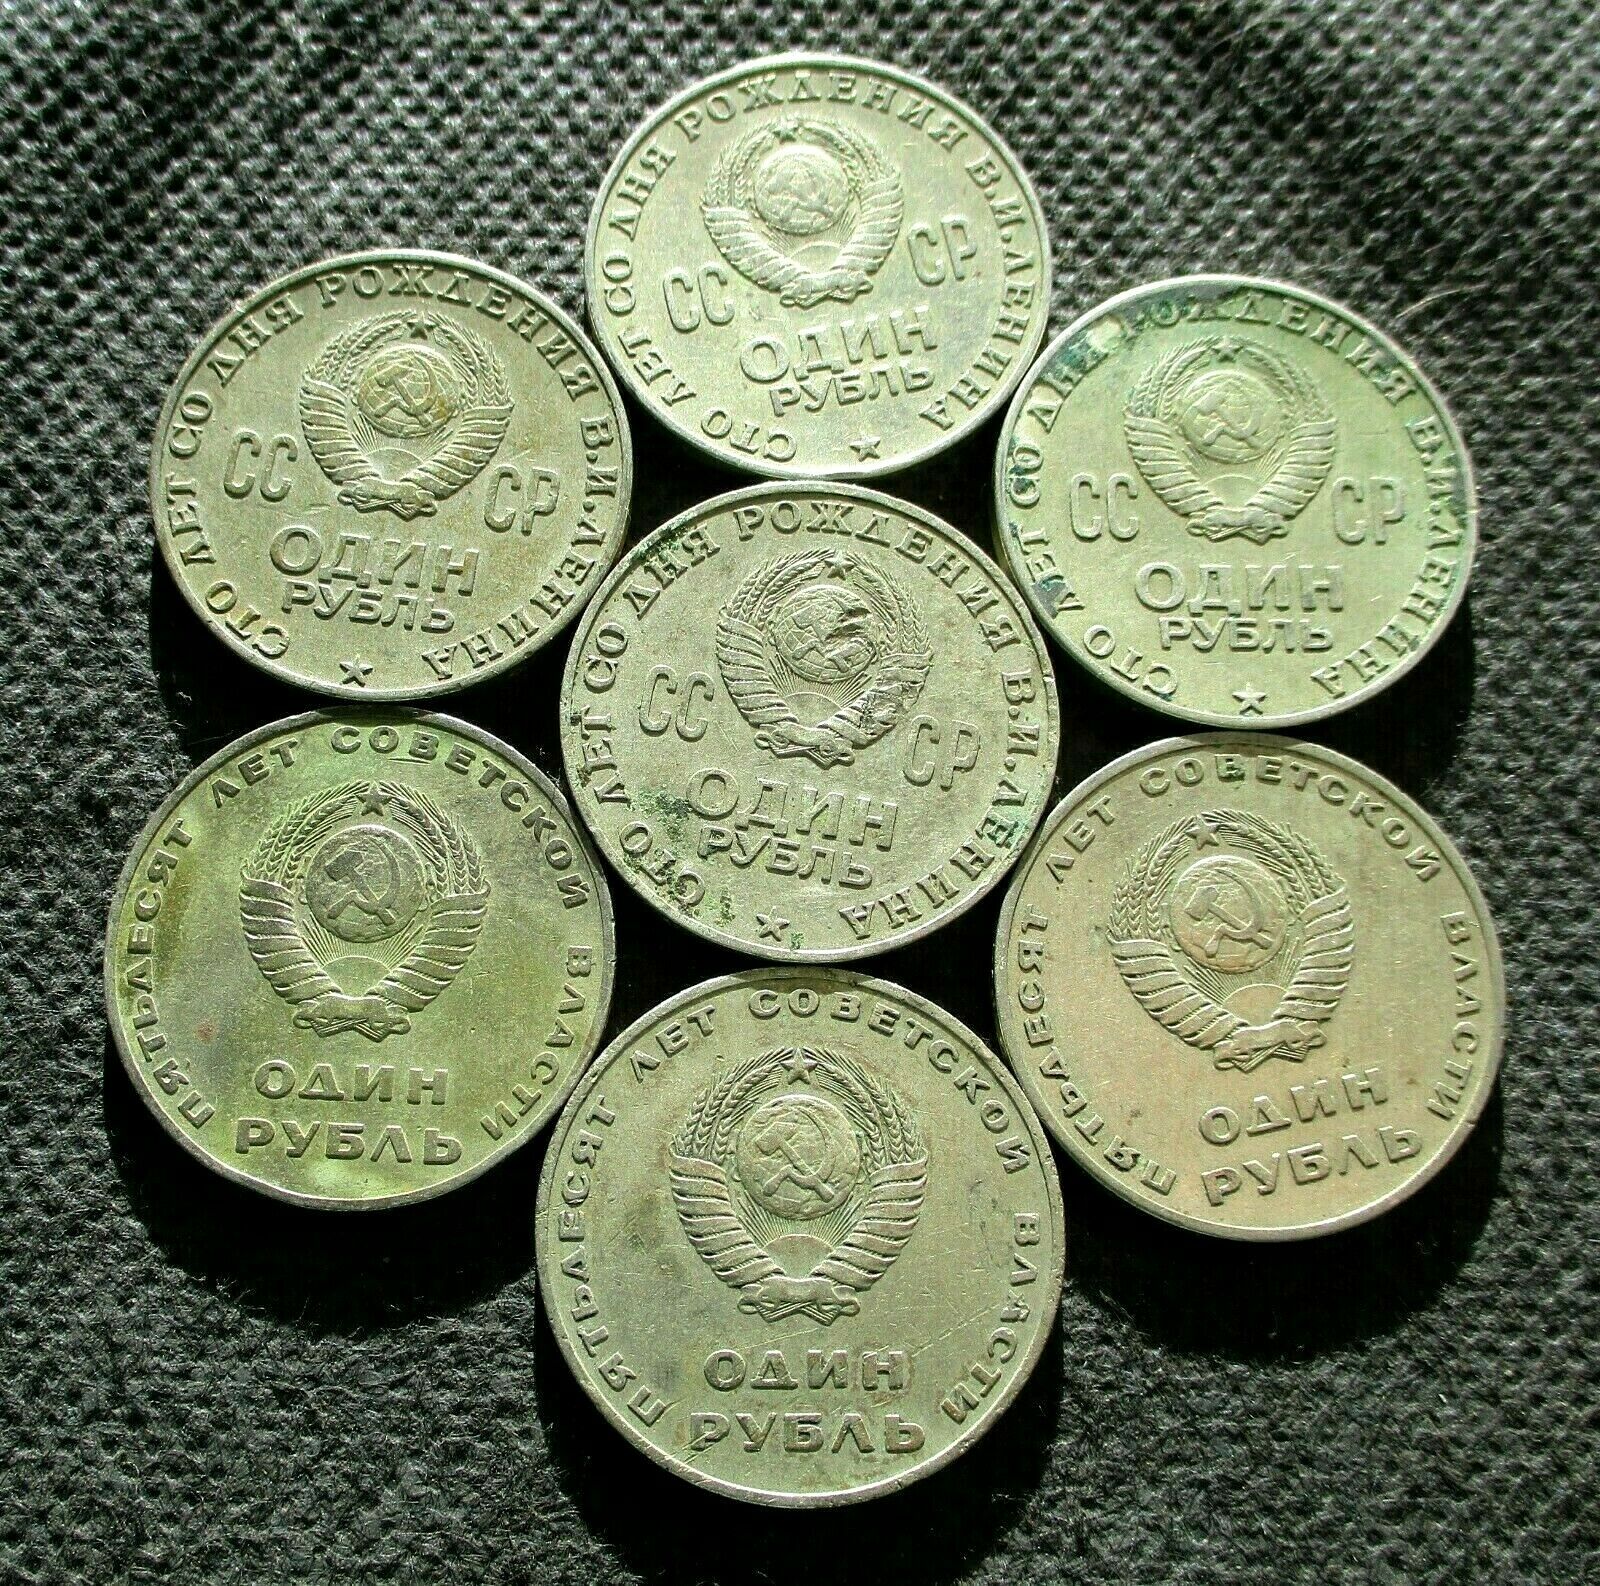 Coins Of Soviet Union Russia Cccp Sickle & Hammer Lenin Victory - Mix 1311